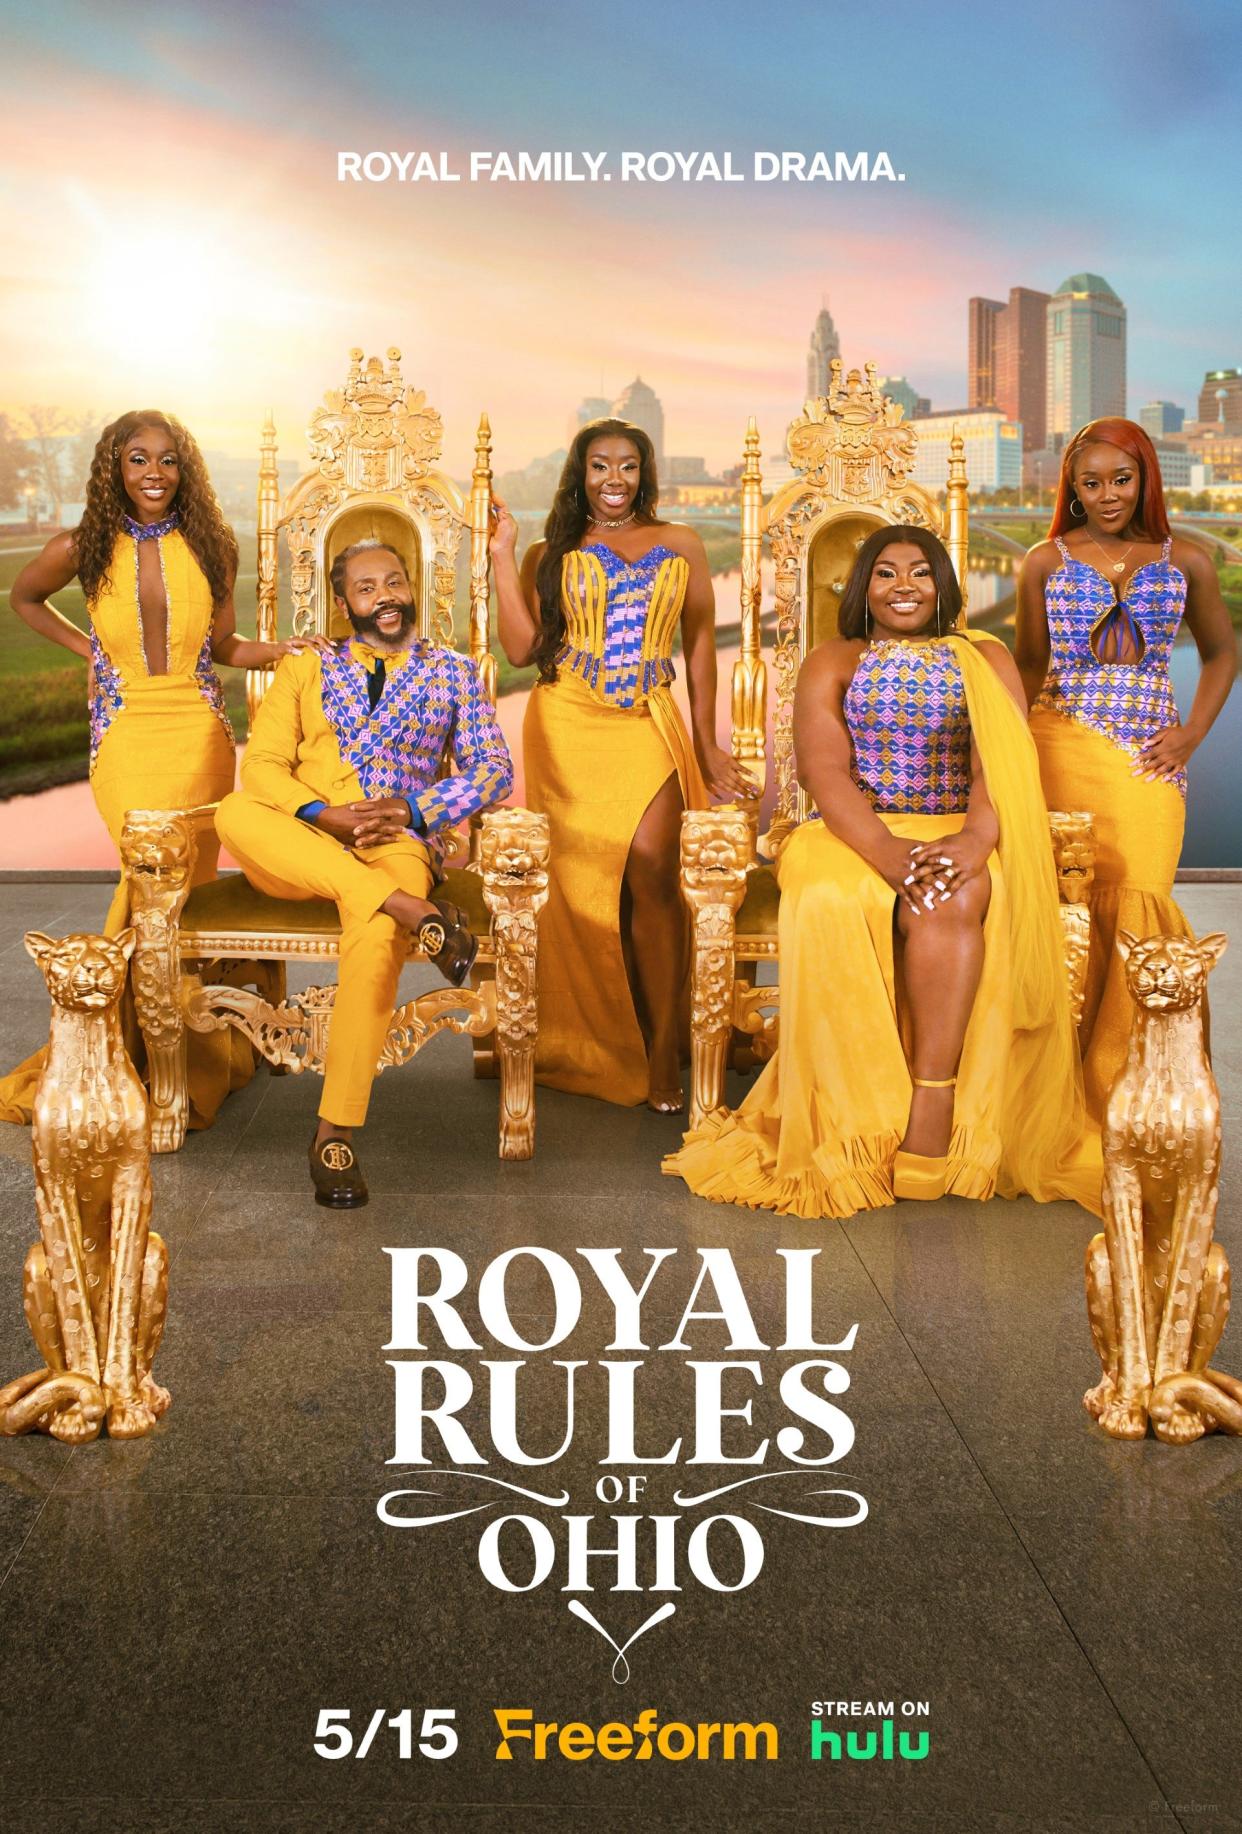 The new series, "Royal Rules of Ohio," portrays the lifestyle of three young sisters who must balance enjoying life in their 20s with the responsibility of upholding their reputation as Ghanaian royals. The series premieres May 15 on Freeform and May 16 on Hulu